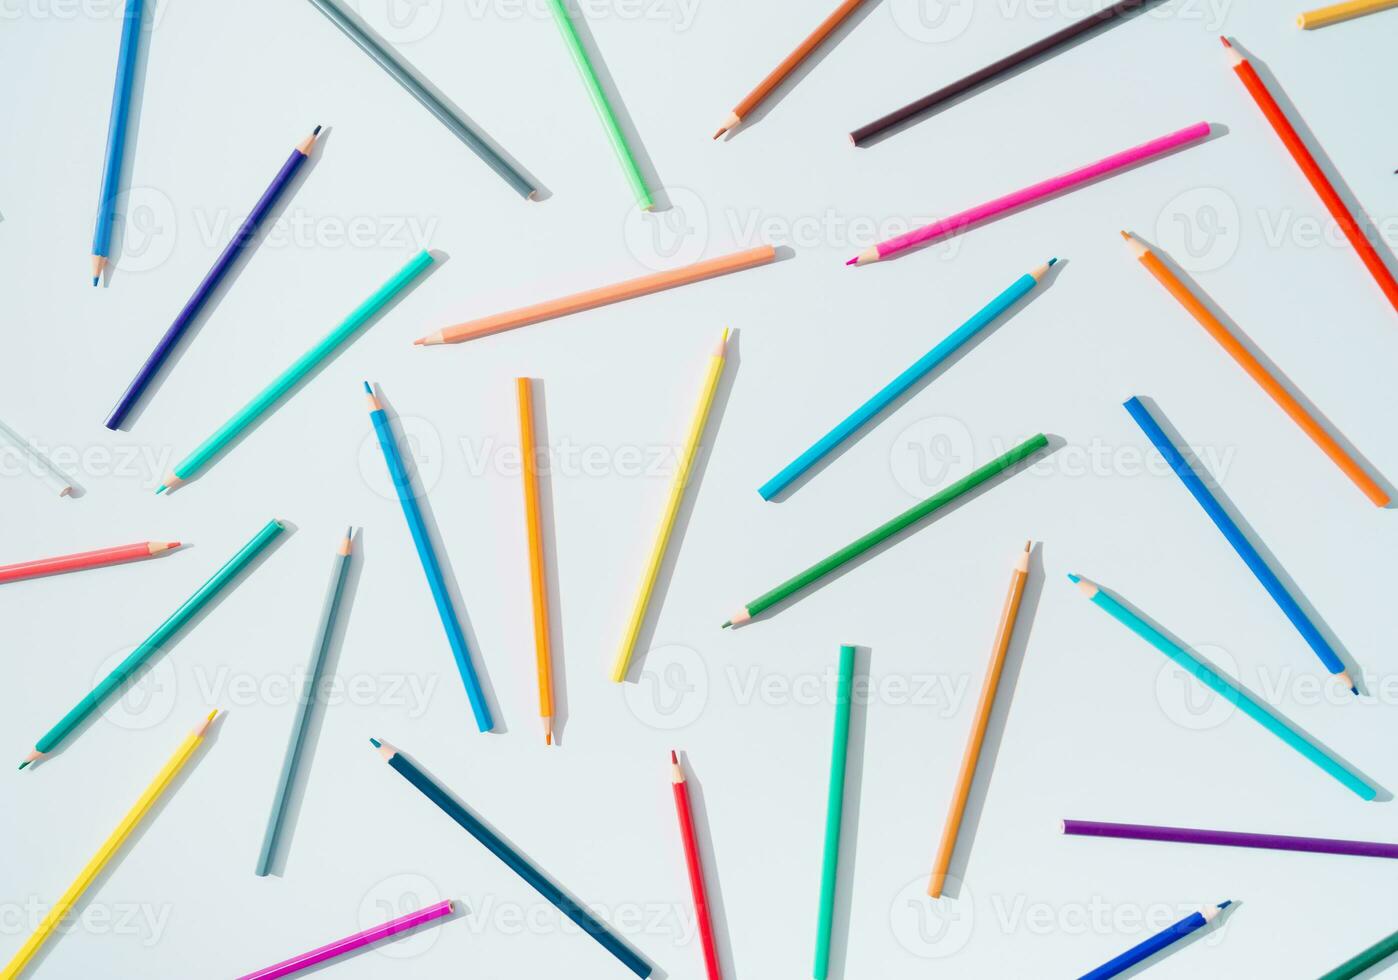 Creative colorful pattern made of colored pencils on white background. Minimal back to school concept. Trendy colored pencils pattern idea. Flat lay background. photo